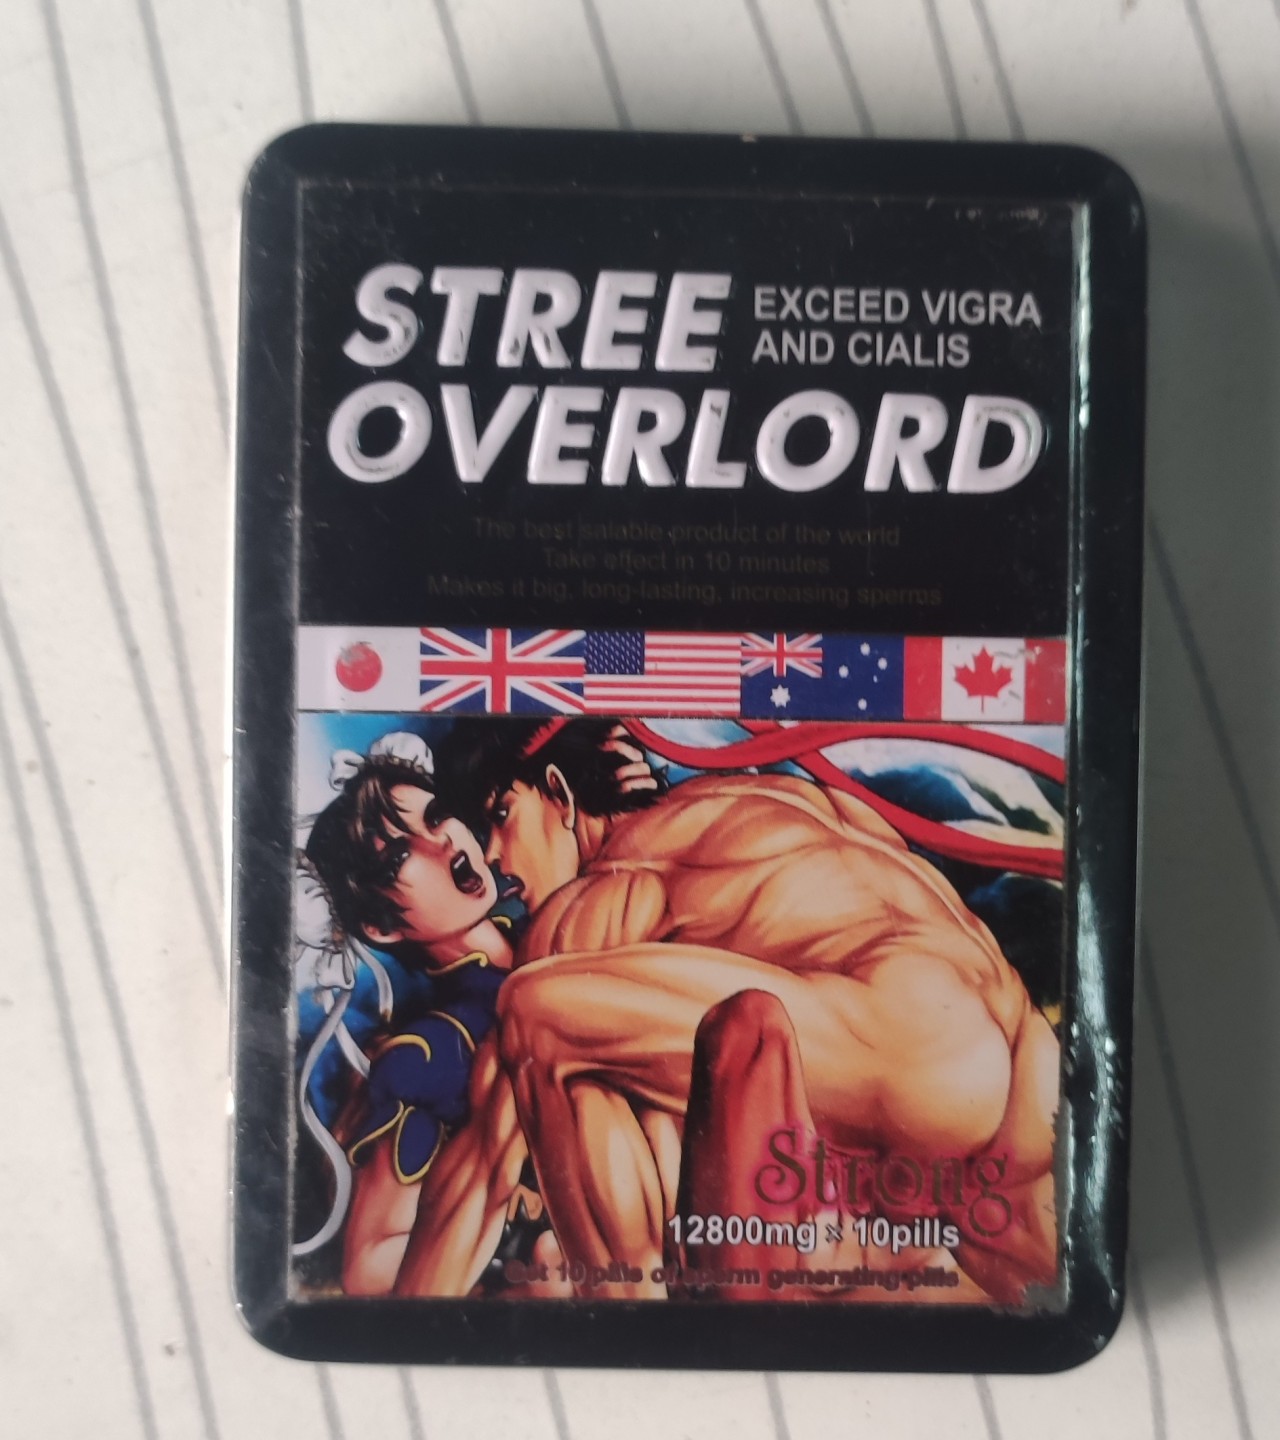 STREE OVERLOAD EXCEED VIAGRA AND CIALIS  PILLS